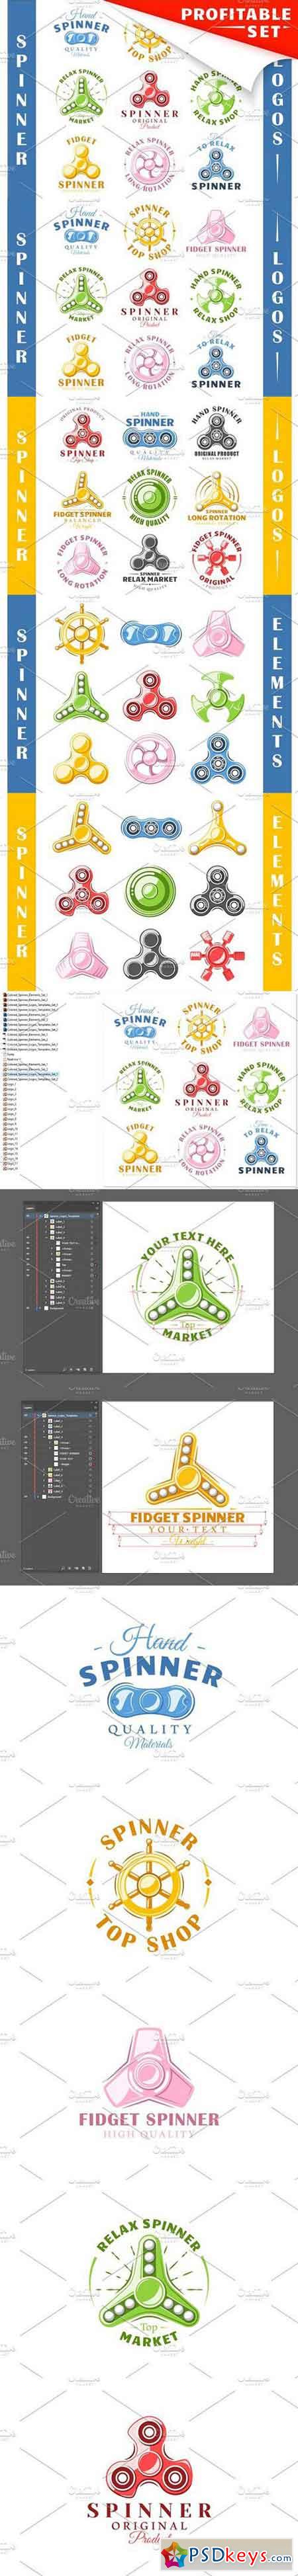 18 Colored Spinner Logos Templates 1663445